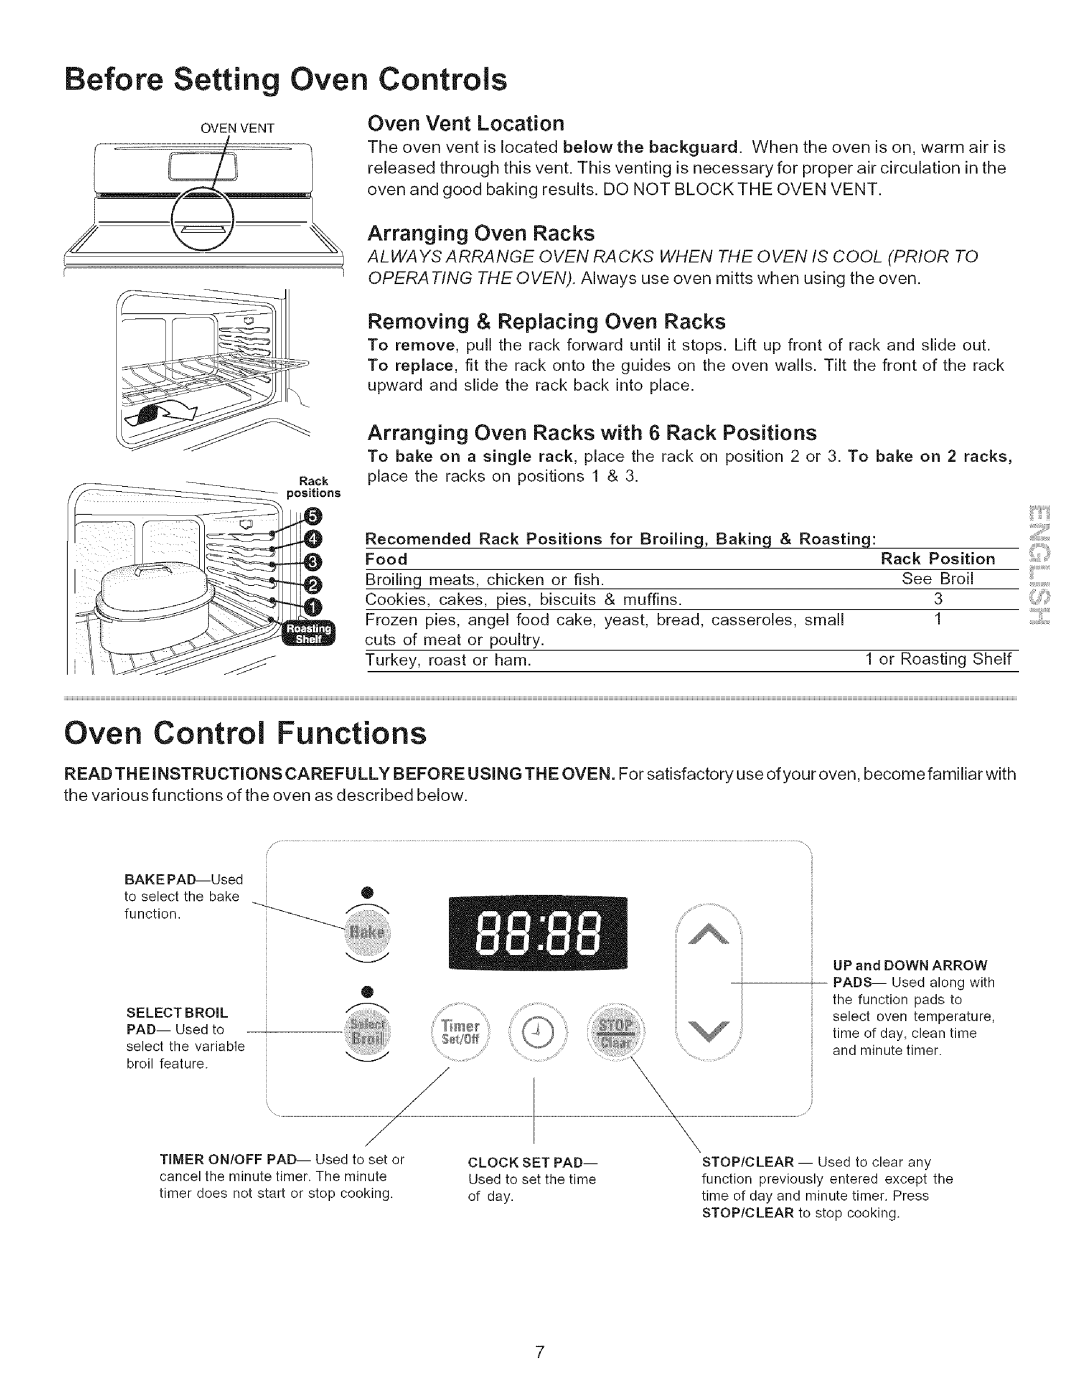 Kenmore 790.7115 manual Before Setting Oven Controls, Oven Control Functions, Arranging Oven Racks with 6 Rack Positions 